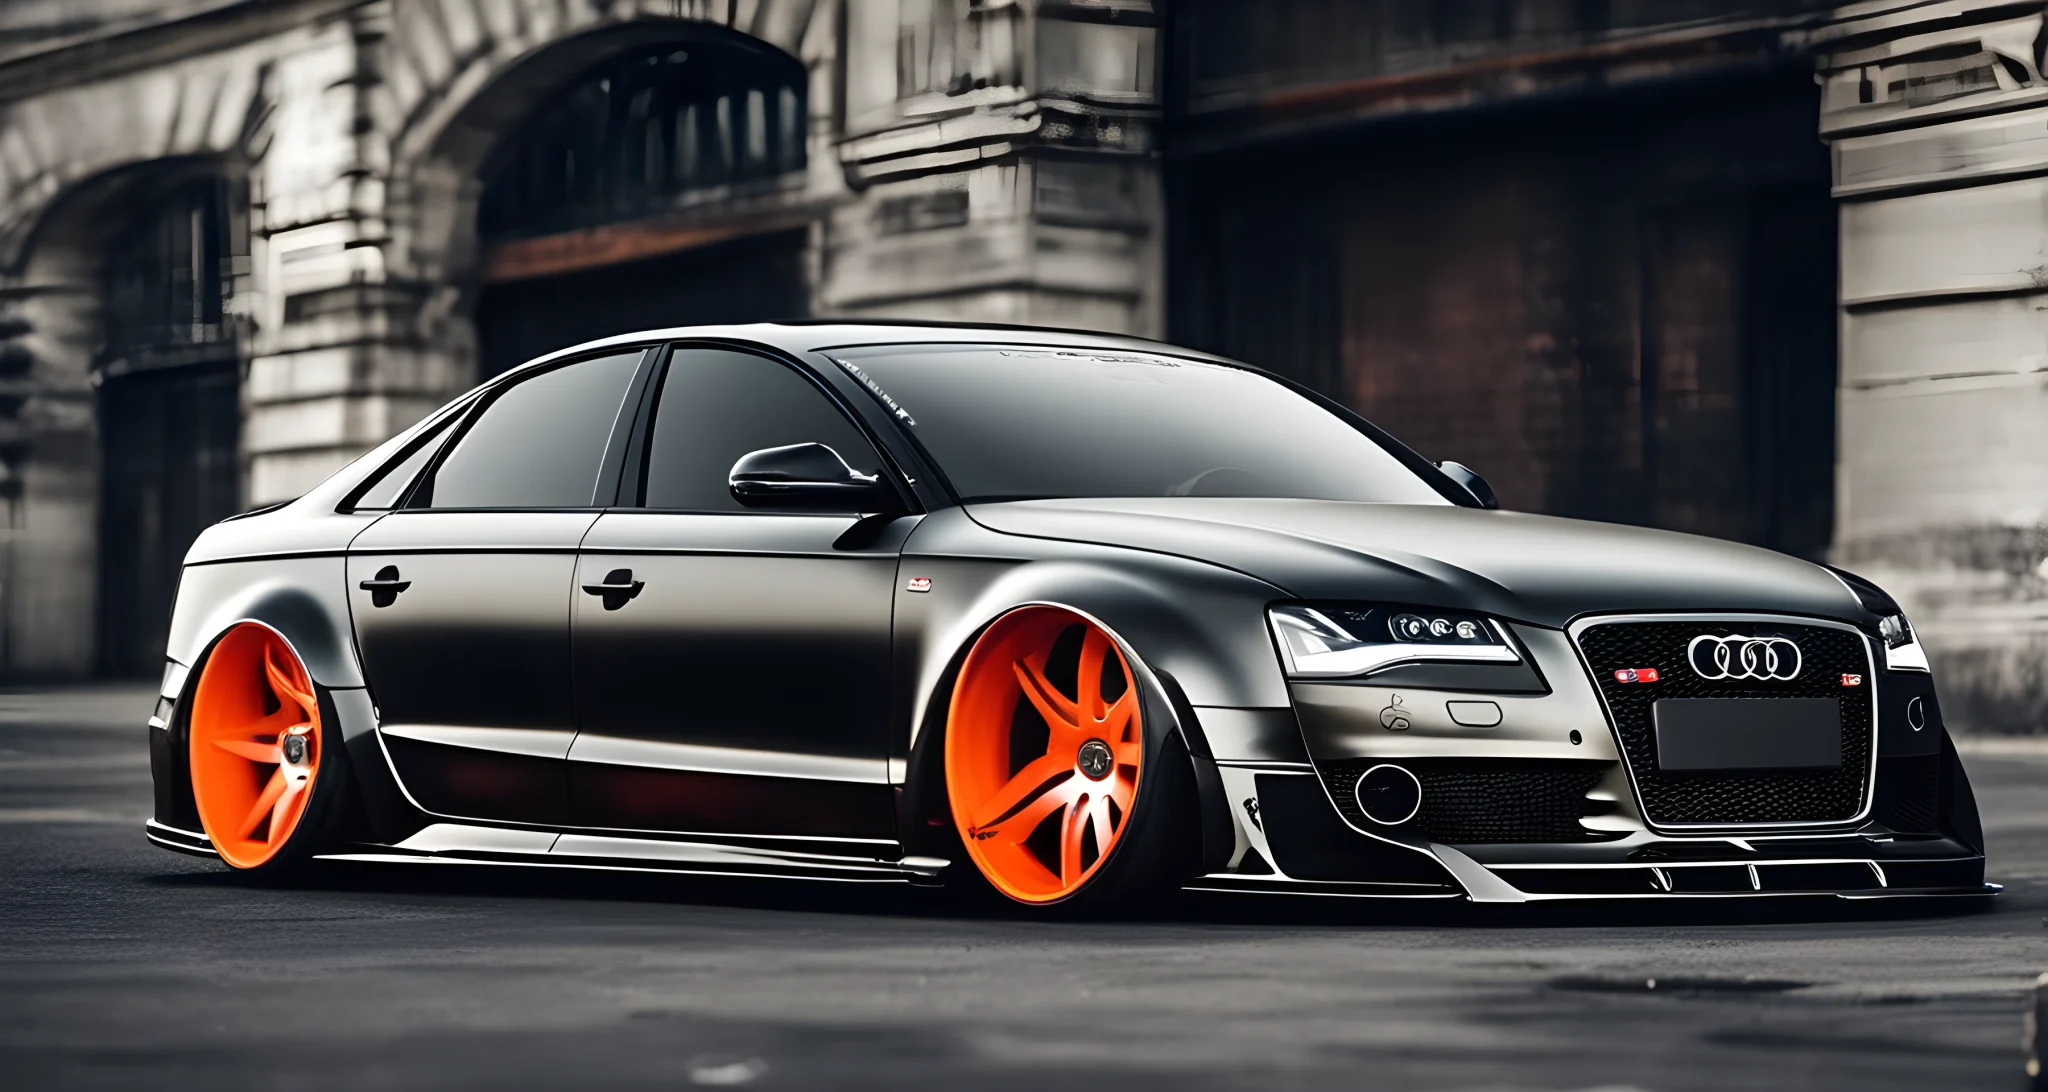 The image features a customized Audi with unique aftermarket parts and personalized modifications, highlighting the trend of personalization in the automotive industry.